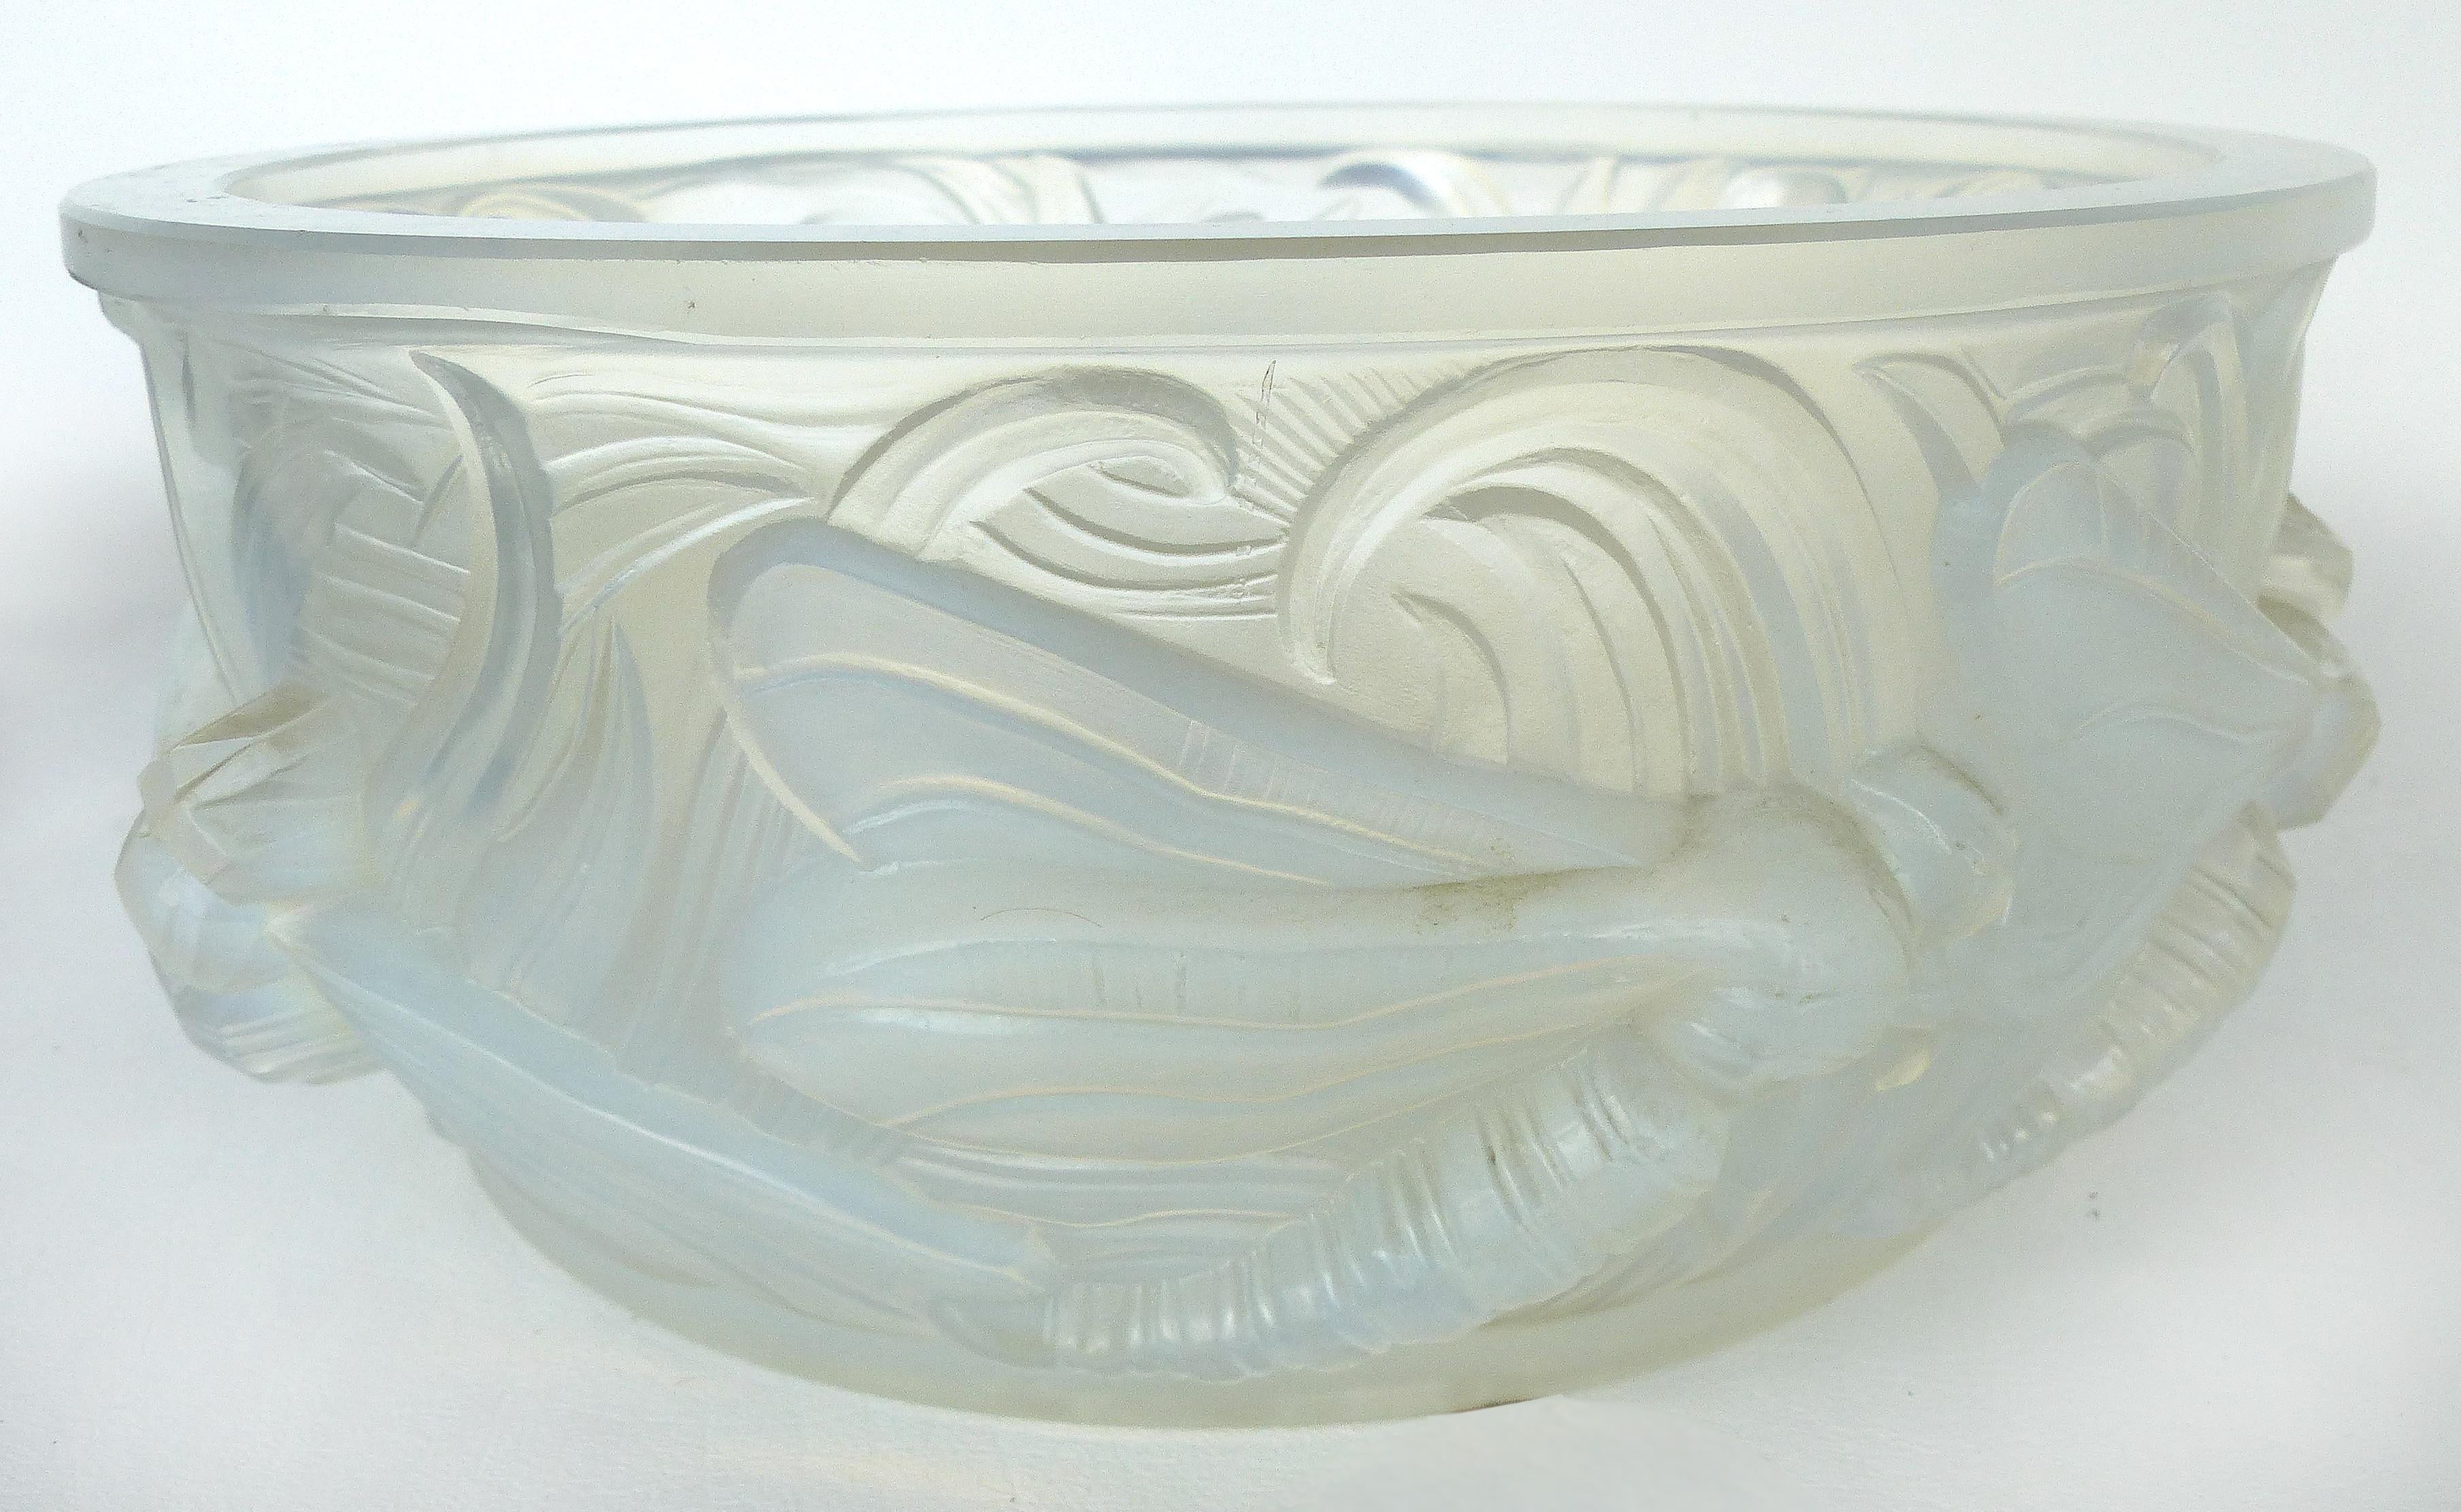 Verlys France opalescent glass dragonfly bowl

Offered for sale is a substantial Verlys France opalescent glass bowl depicting dragonflies. Signed on the base as pictured. This is a large and decorative bowl with wonderful high bas relief art deco